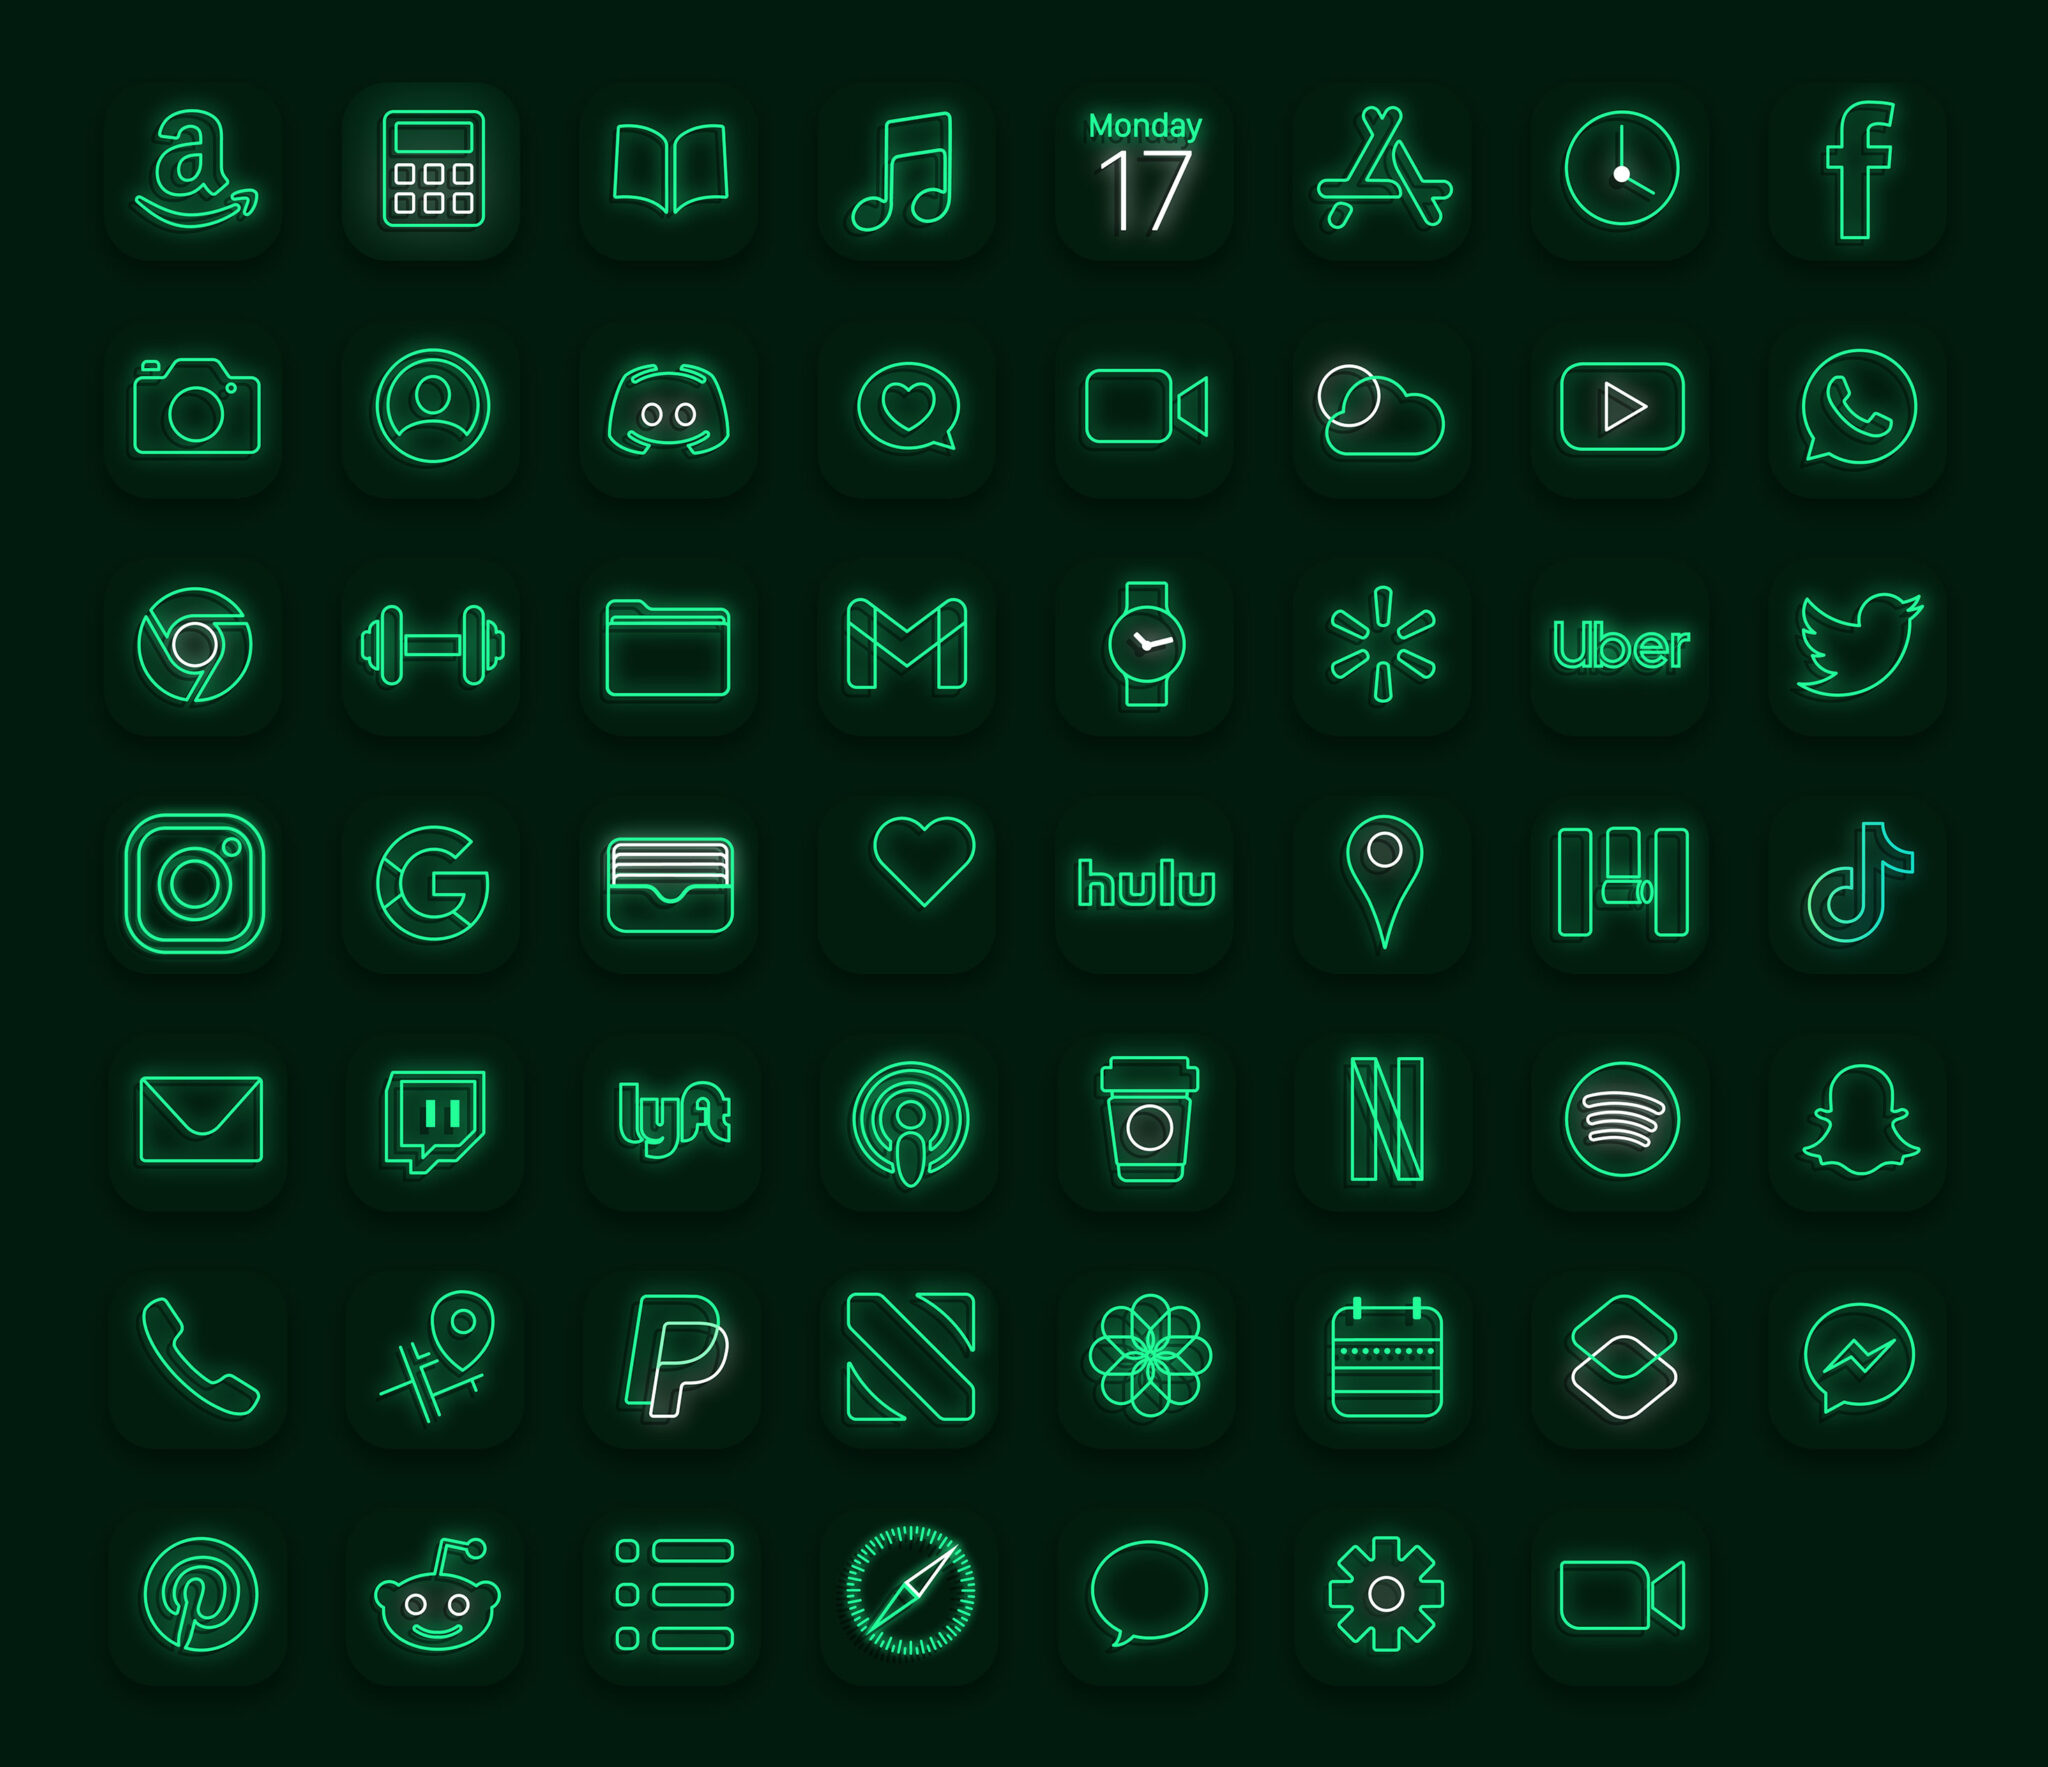 Green App Icons Aesthetic Roblox - View 29 Brown Aesthetic App Icons ...